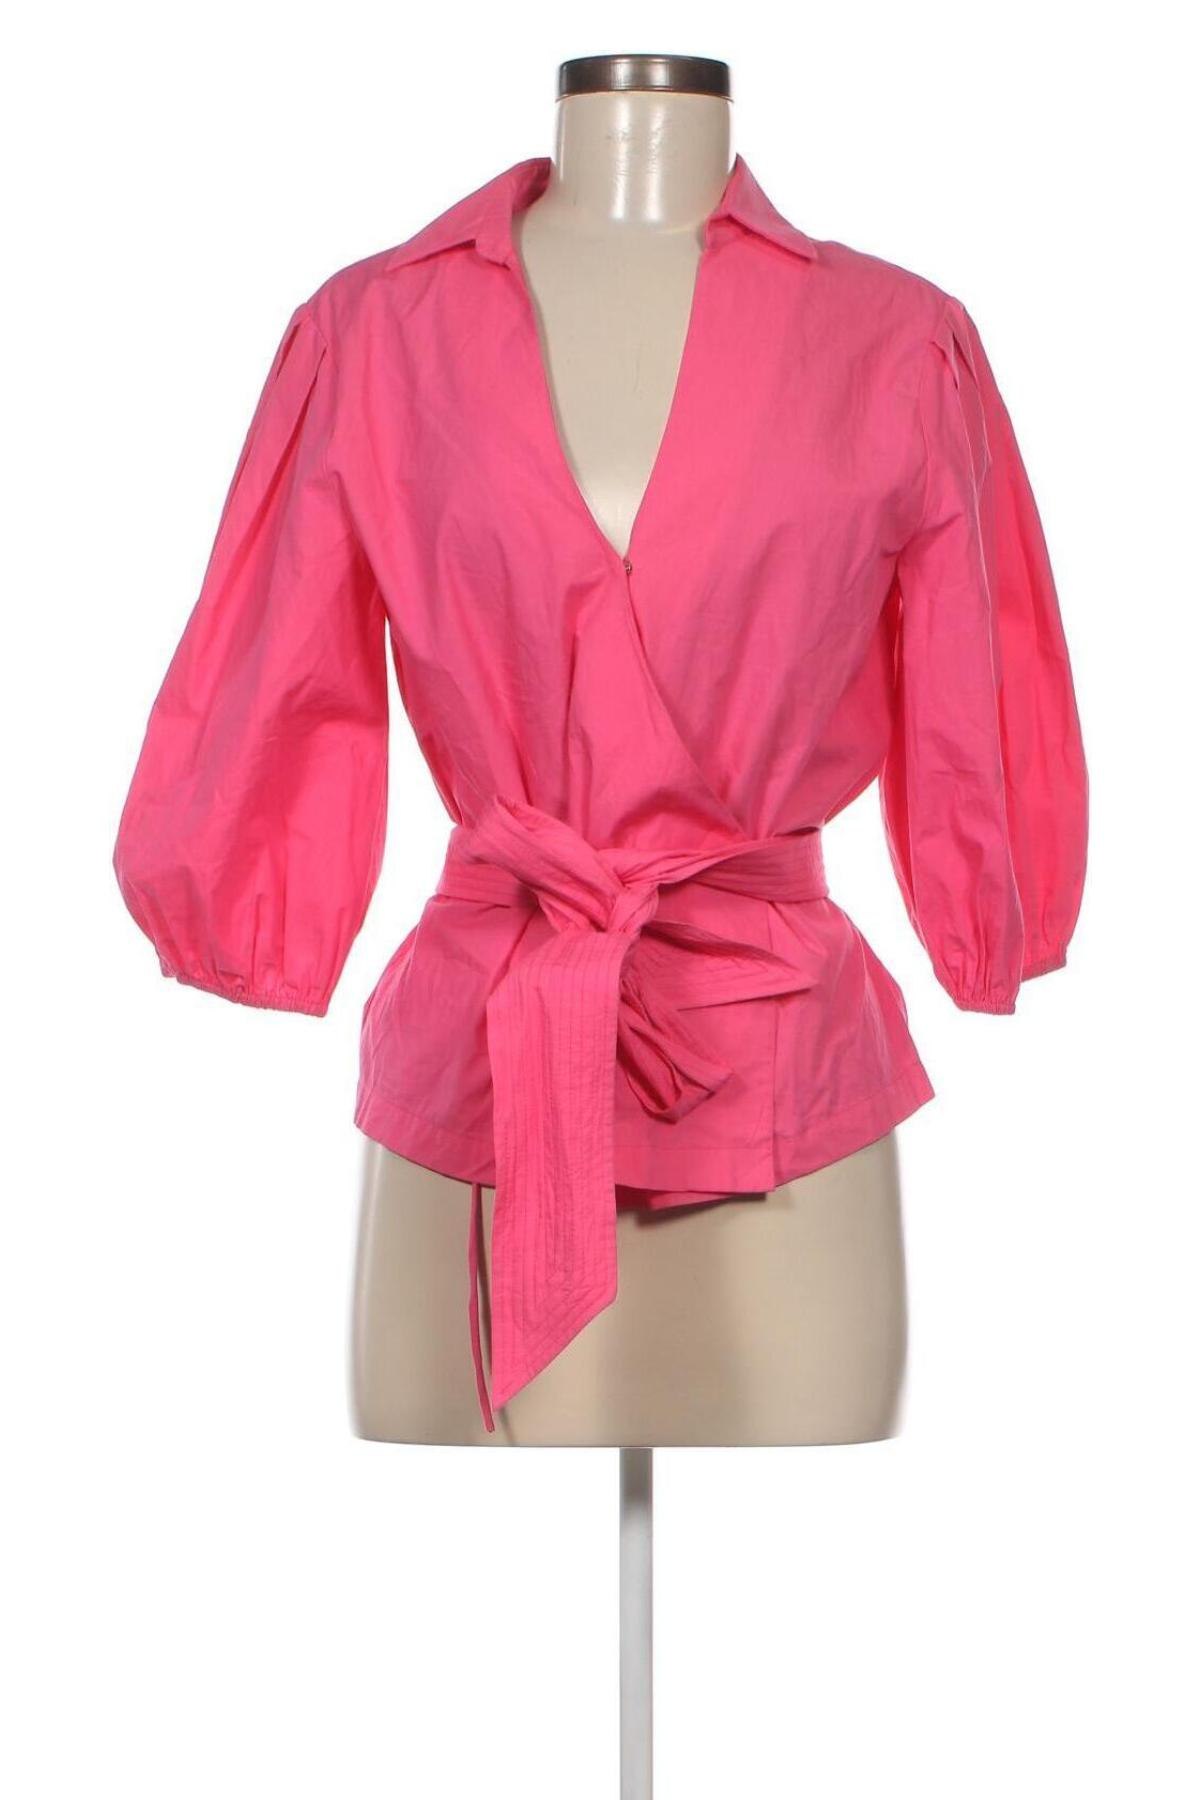 Damenbluse Marciano by Guess, Größe S, Farbe Rosa, Preis 82,99 €